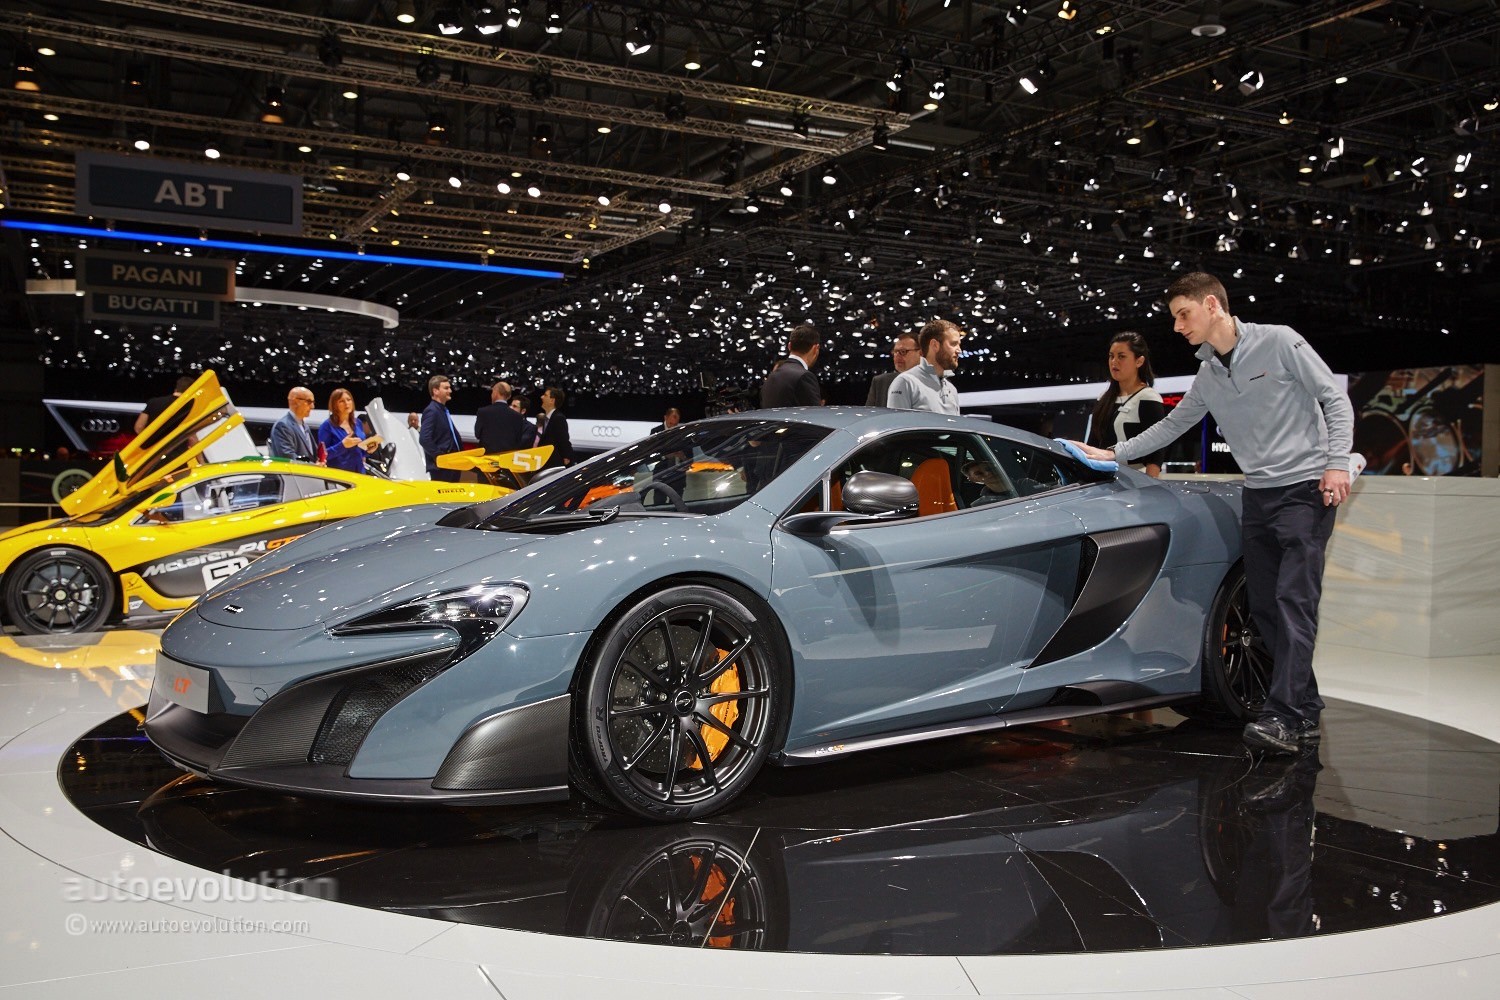 mclaren-675lt-is-a-longtail-supercar-for-the-track-in-geneva-video-live-photos_14